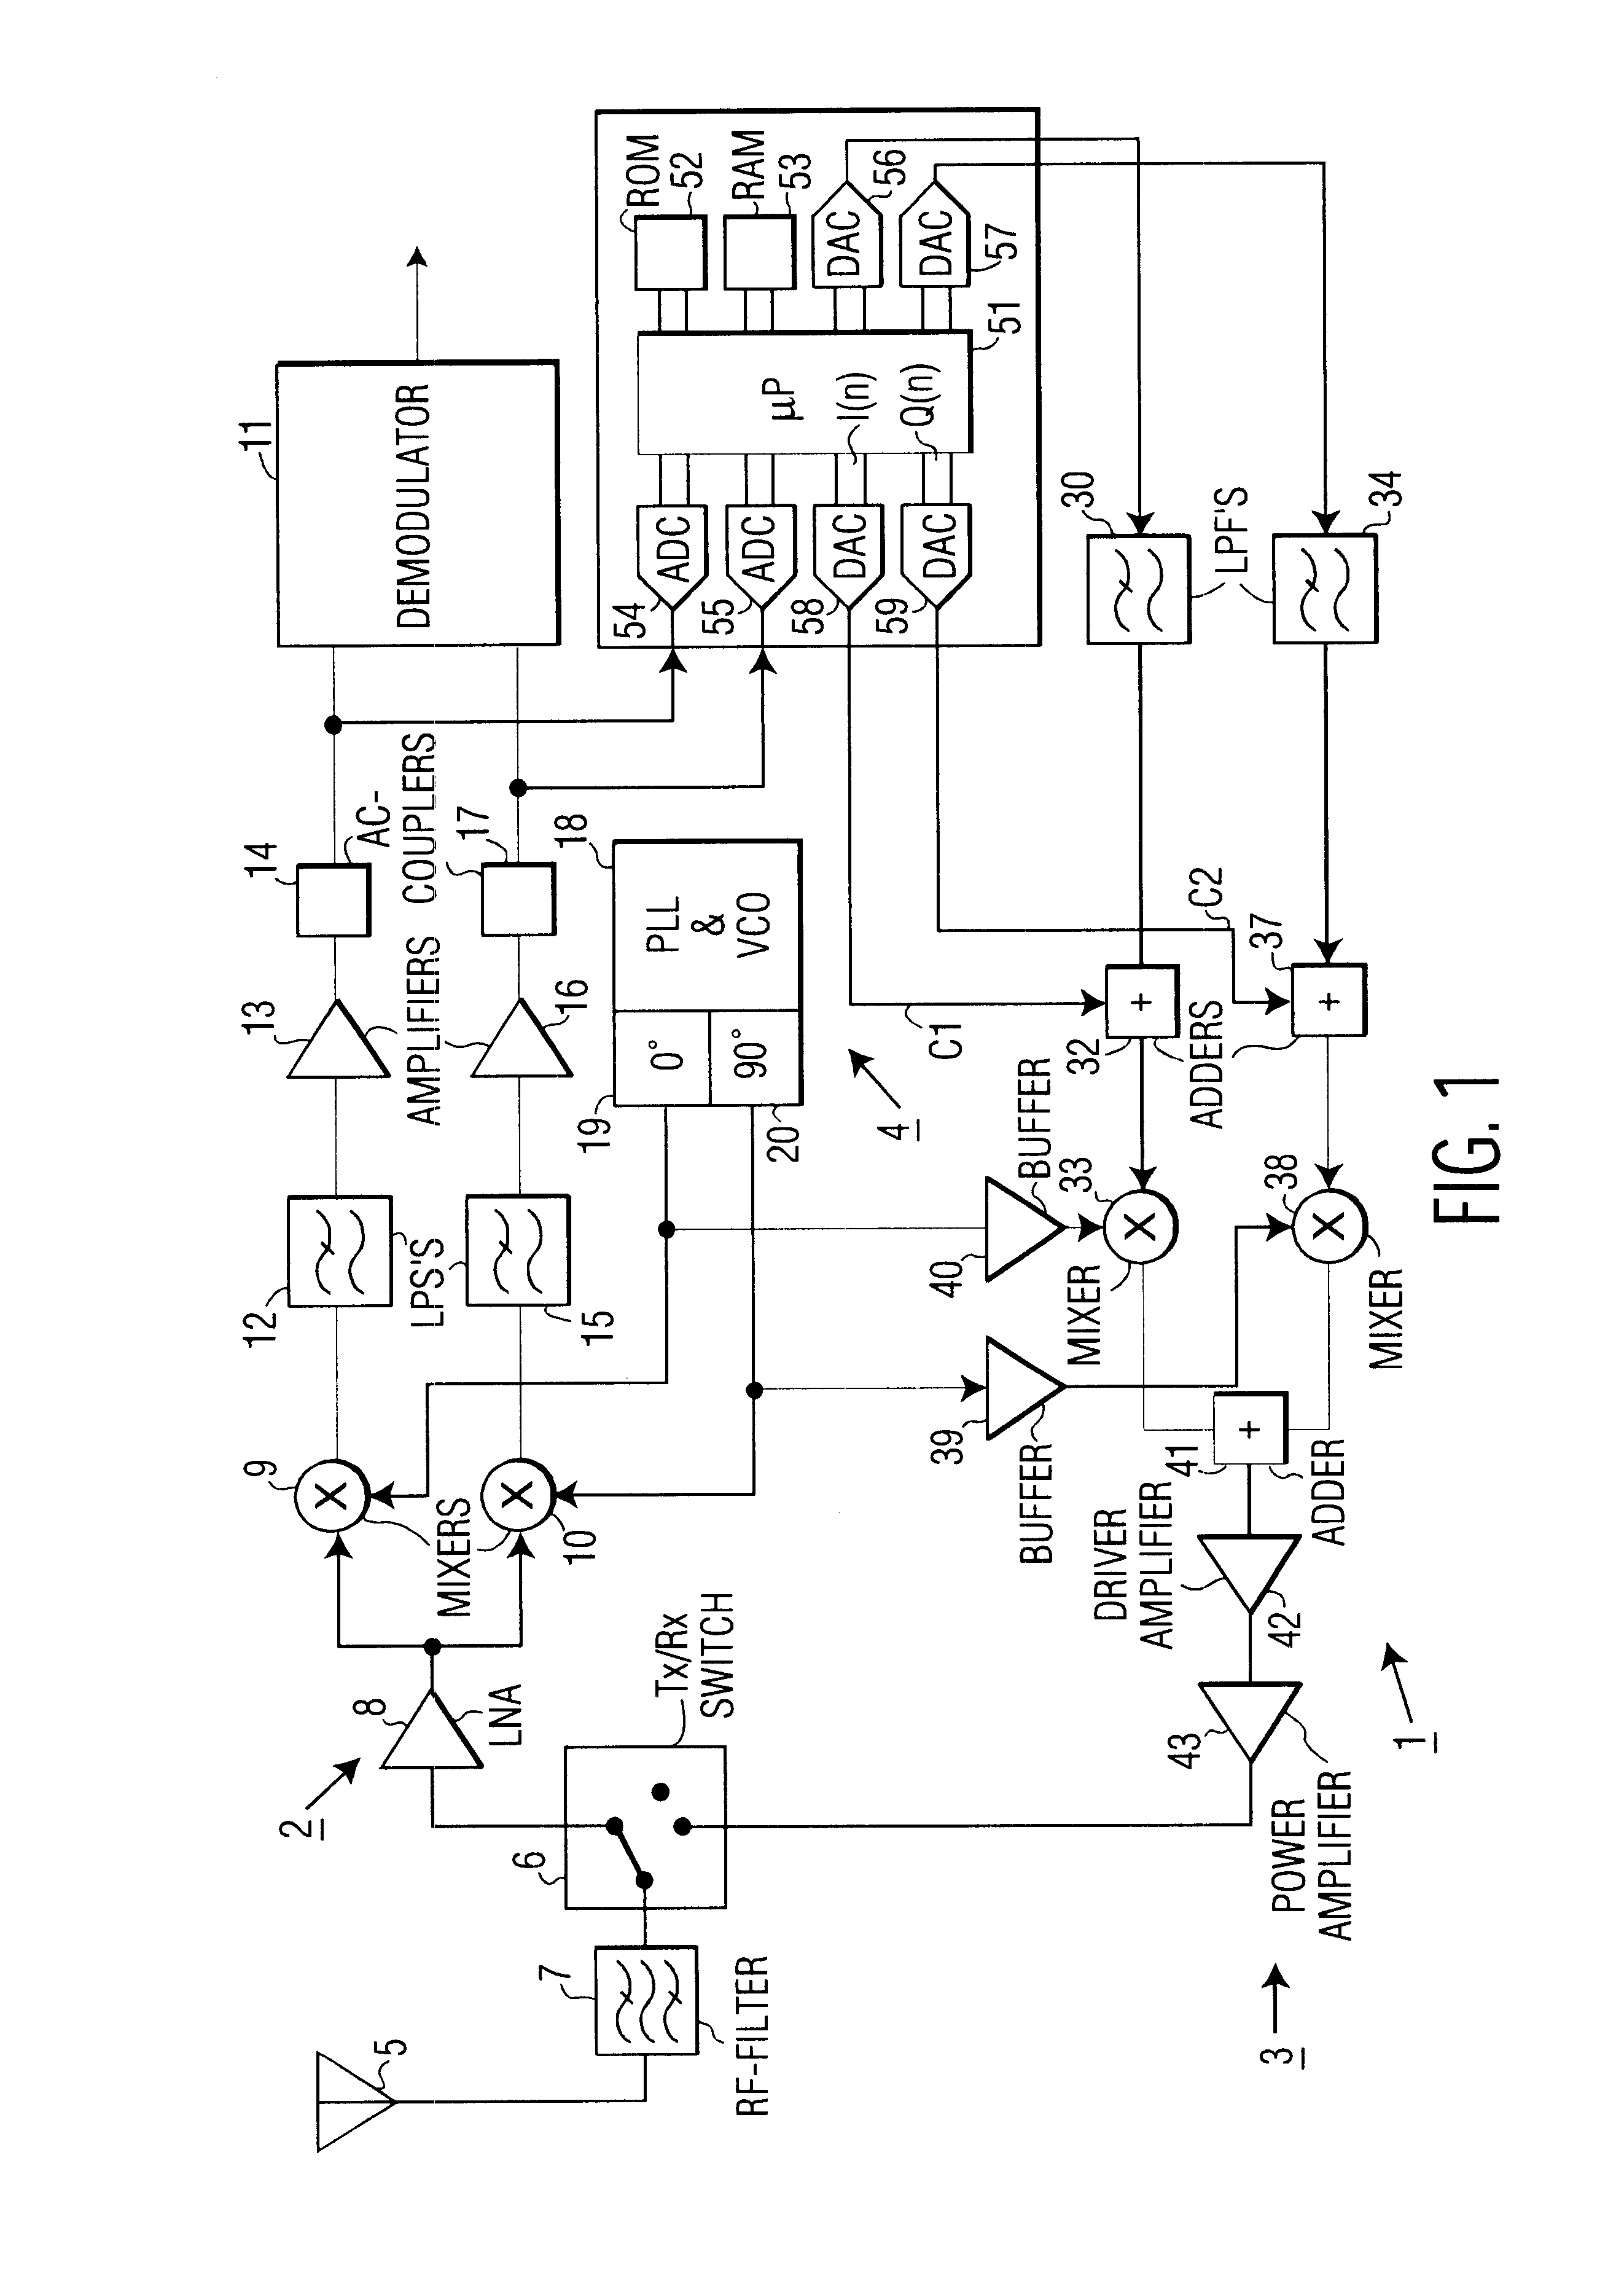 Autocalibration of a transceiver through nulling of a DC-voltage in a receiver and injecting of DC-signals in a transmitter